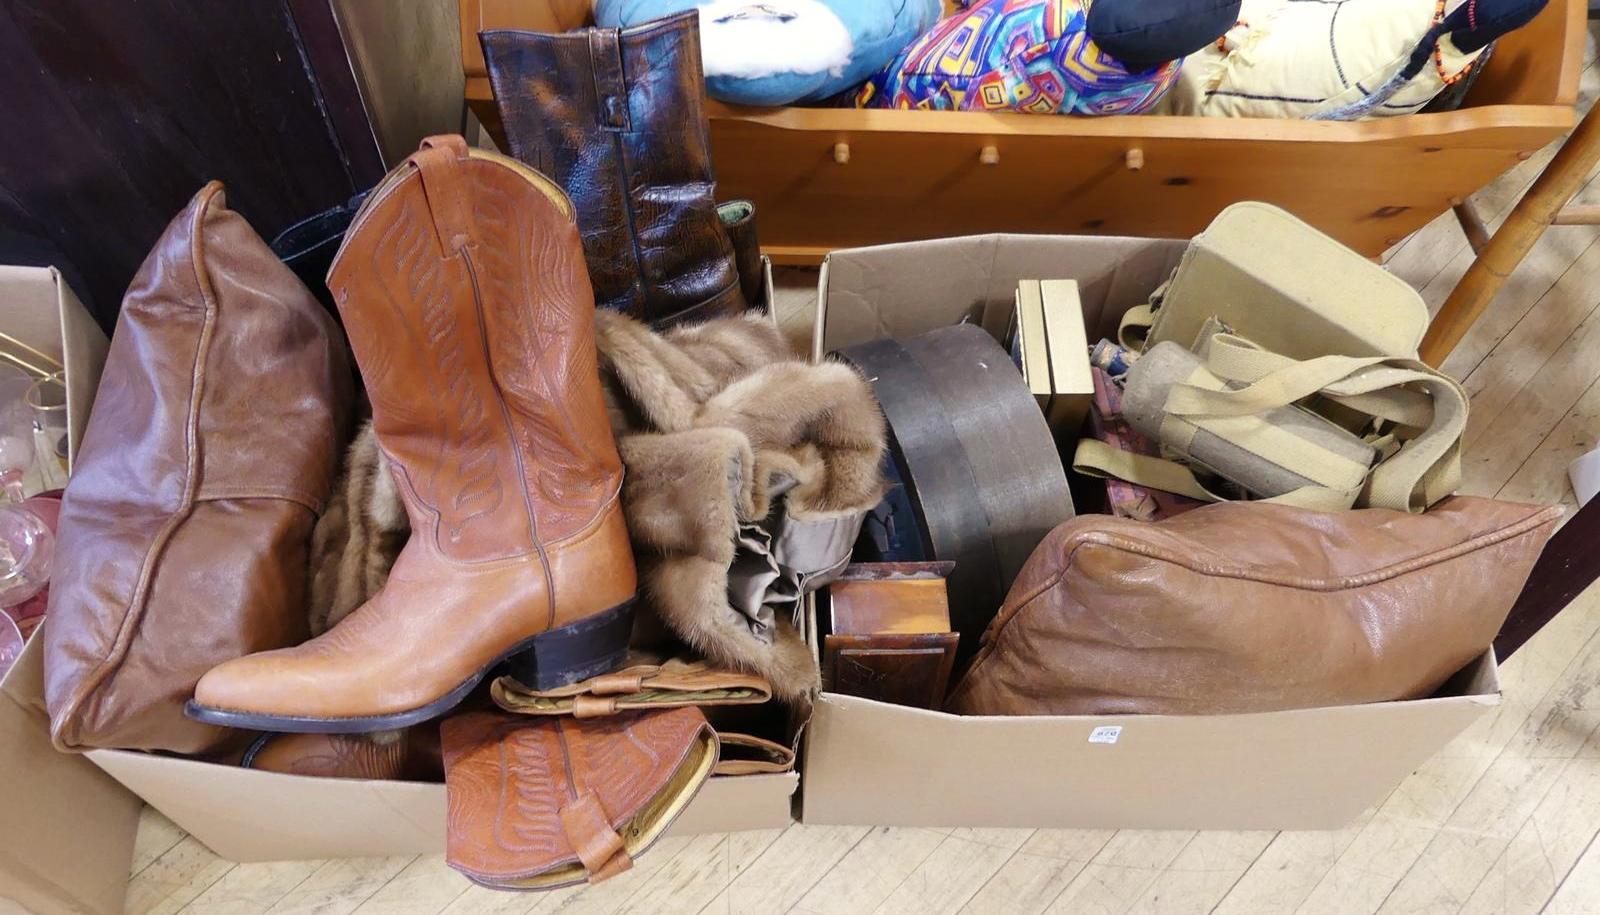 TWO BOXES OF BOOTS, FUR COAT, ETC.